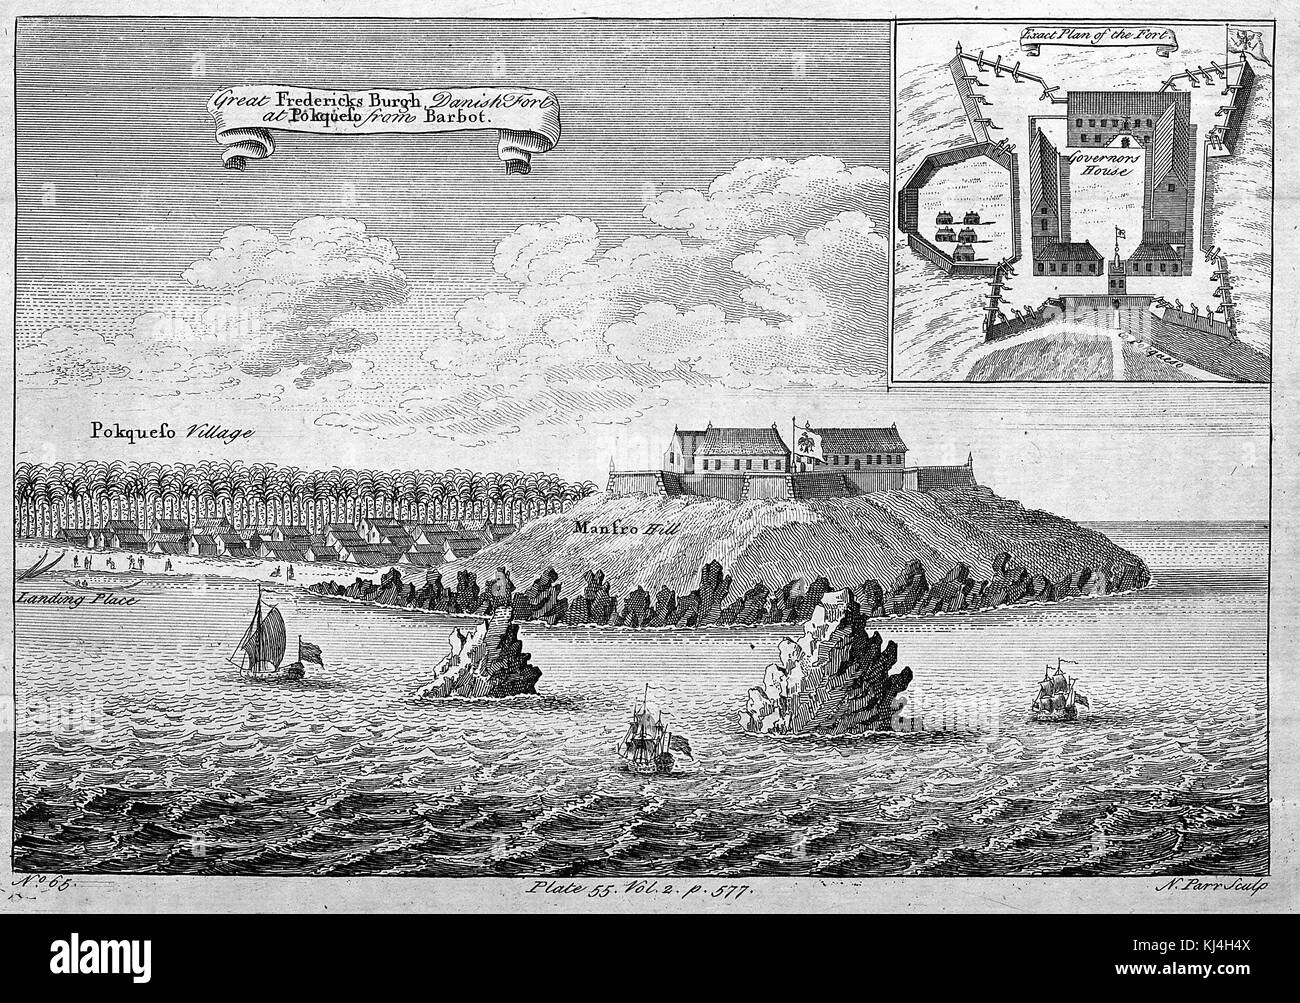 An engraving from an illustration of Great Fredericks Burg, which was a Danish fort, the image diagrams the locations of the landing area, Pokqueso Village, and shows that the fort is located on top of Mansro Hill, ships can be seen sailing between large rocks in rising out of the water, 1746. From the New York Public Library. Stock Photo